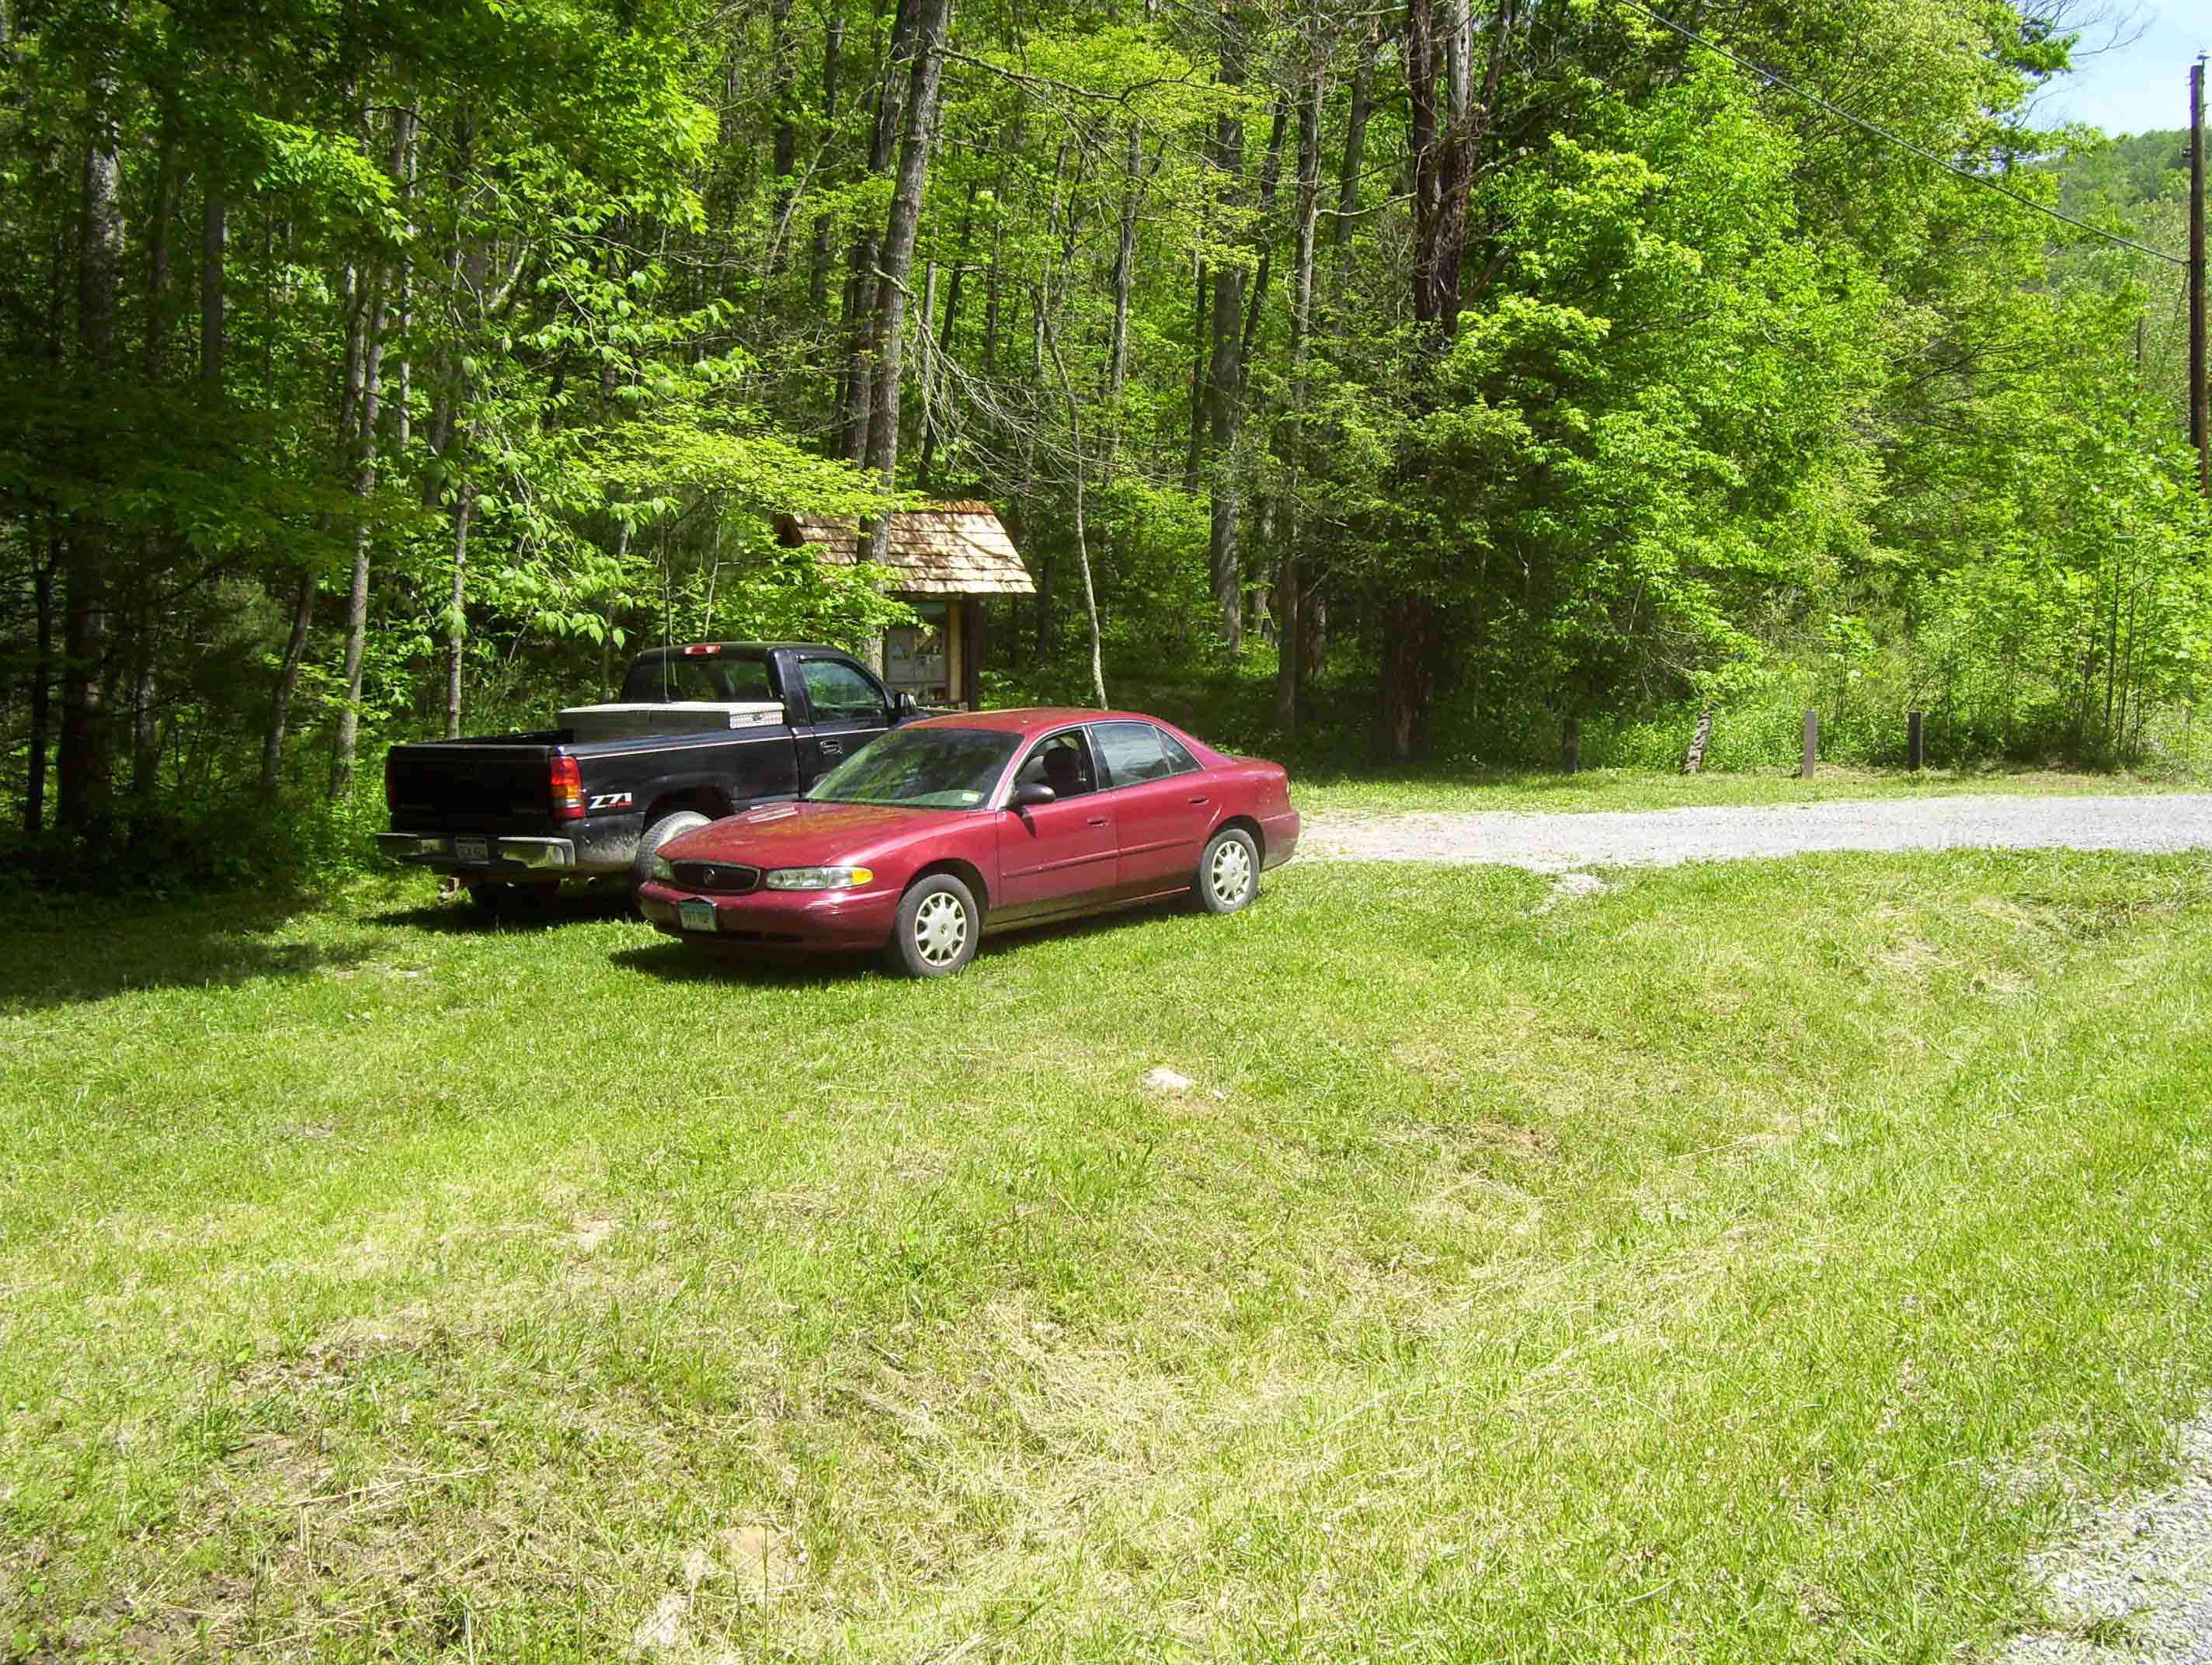 mm 13.2 Parking at Trailhead for Access Trail to AT from VA 635.   Courtesy dlcul@conncoll.edu